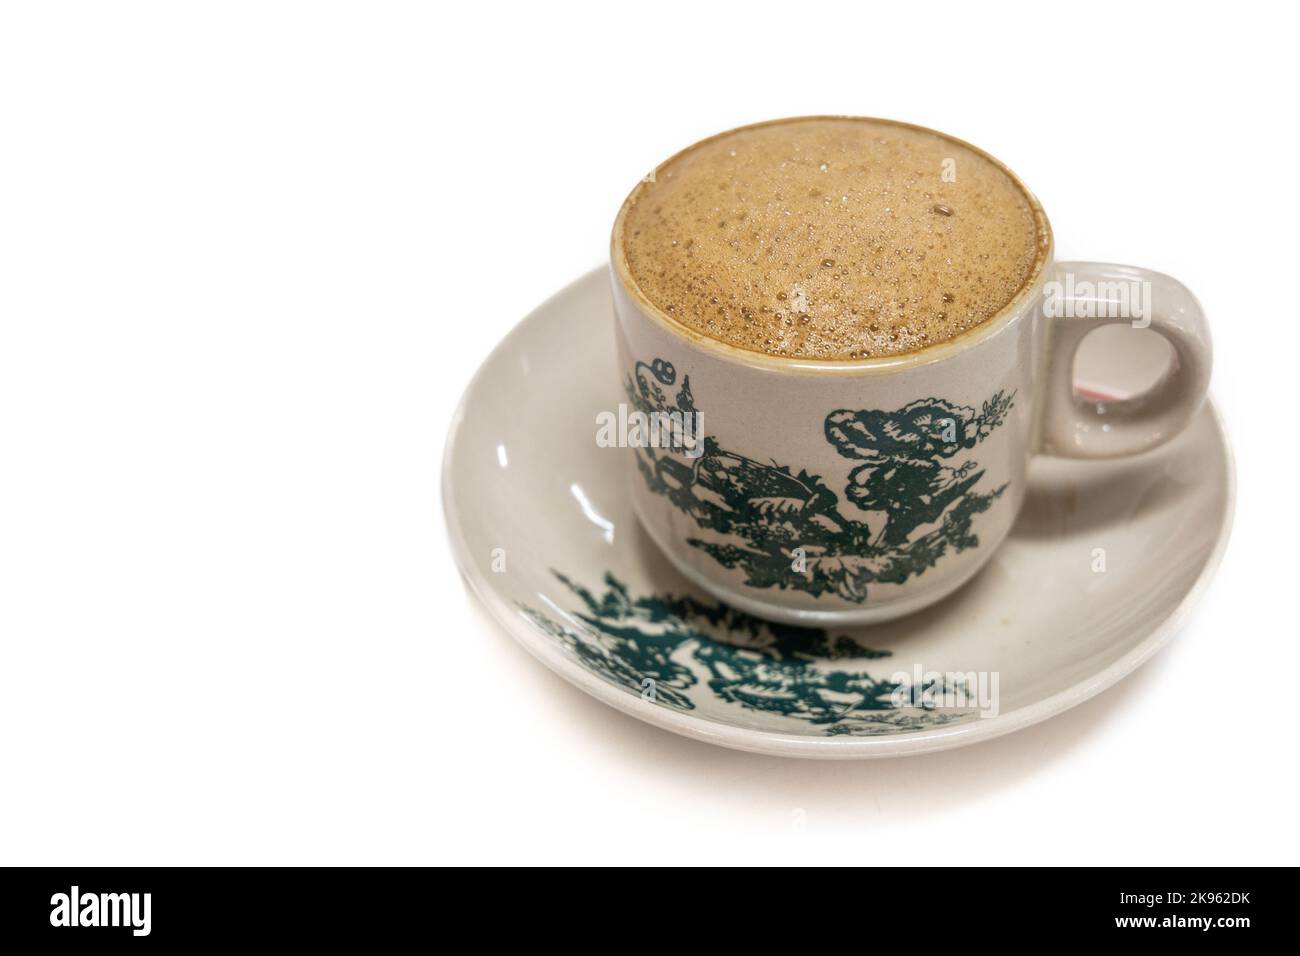 Tradiitional aromatic coffee served in vintage kopitiam cup and saucer in white background Stock Photo